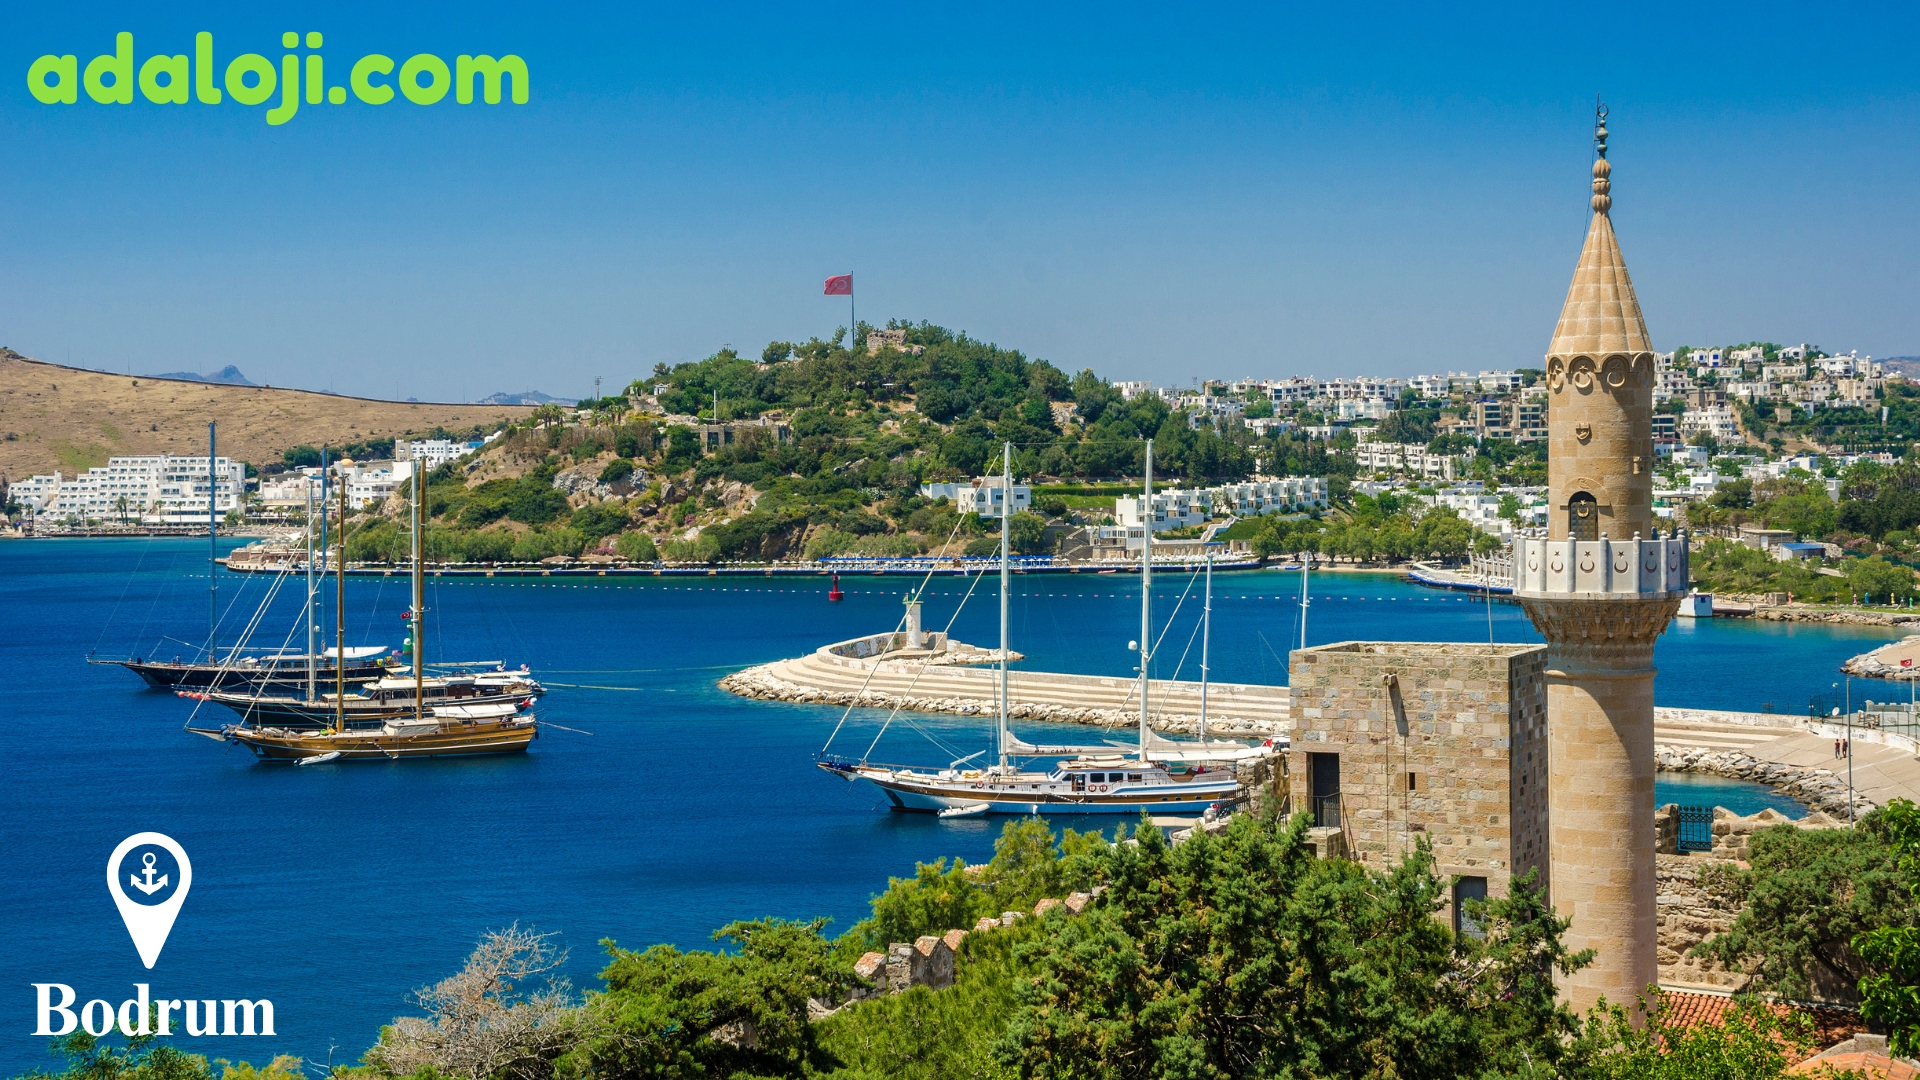 Bodrum - Your Gateway to the Aegean Sea.